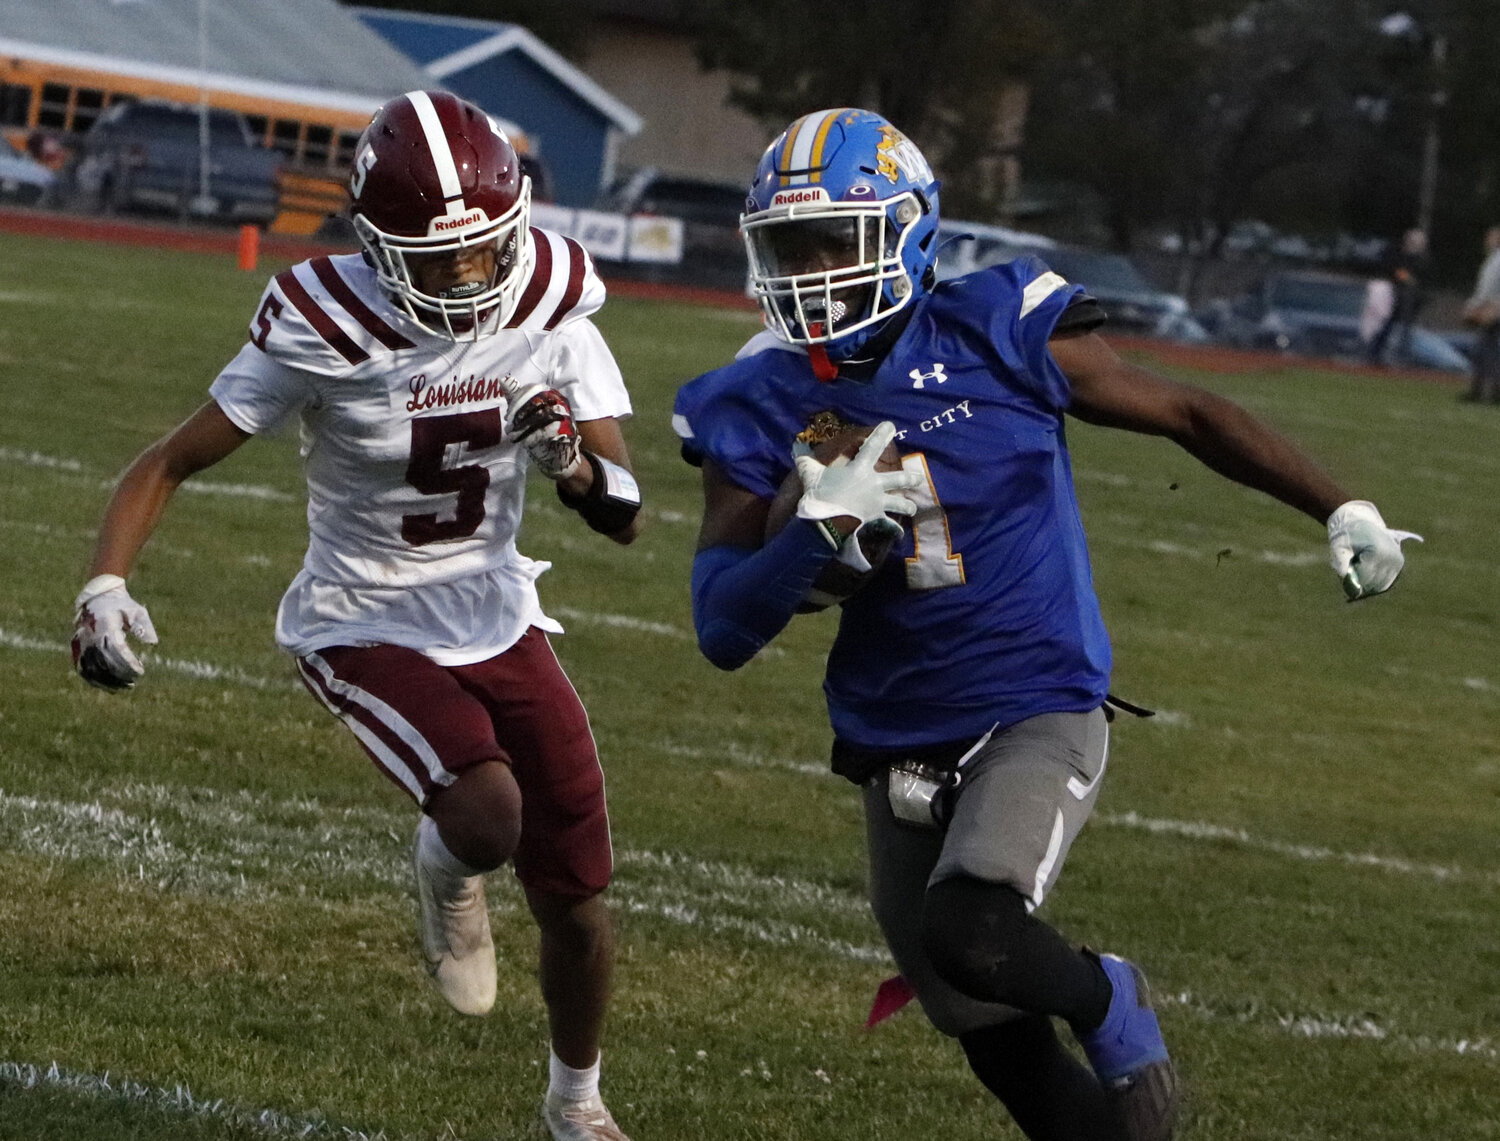 Kayden Allison (right) runs towards the end zone during one of this two touchdown receptions.